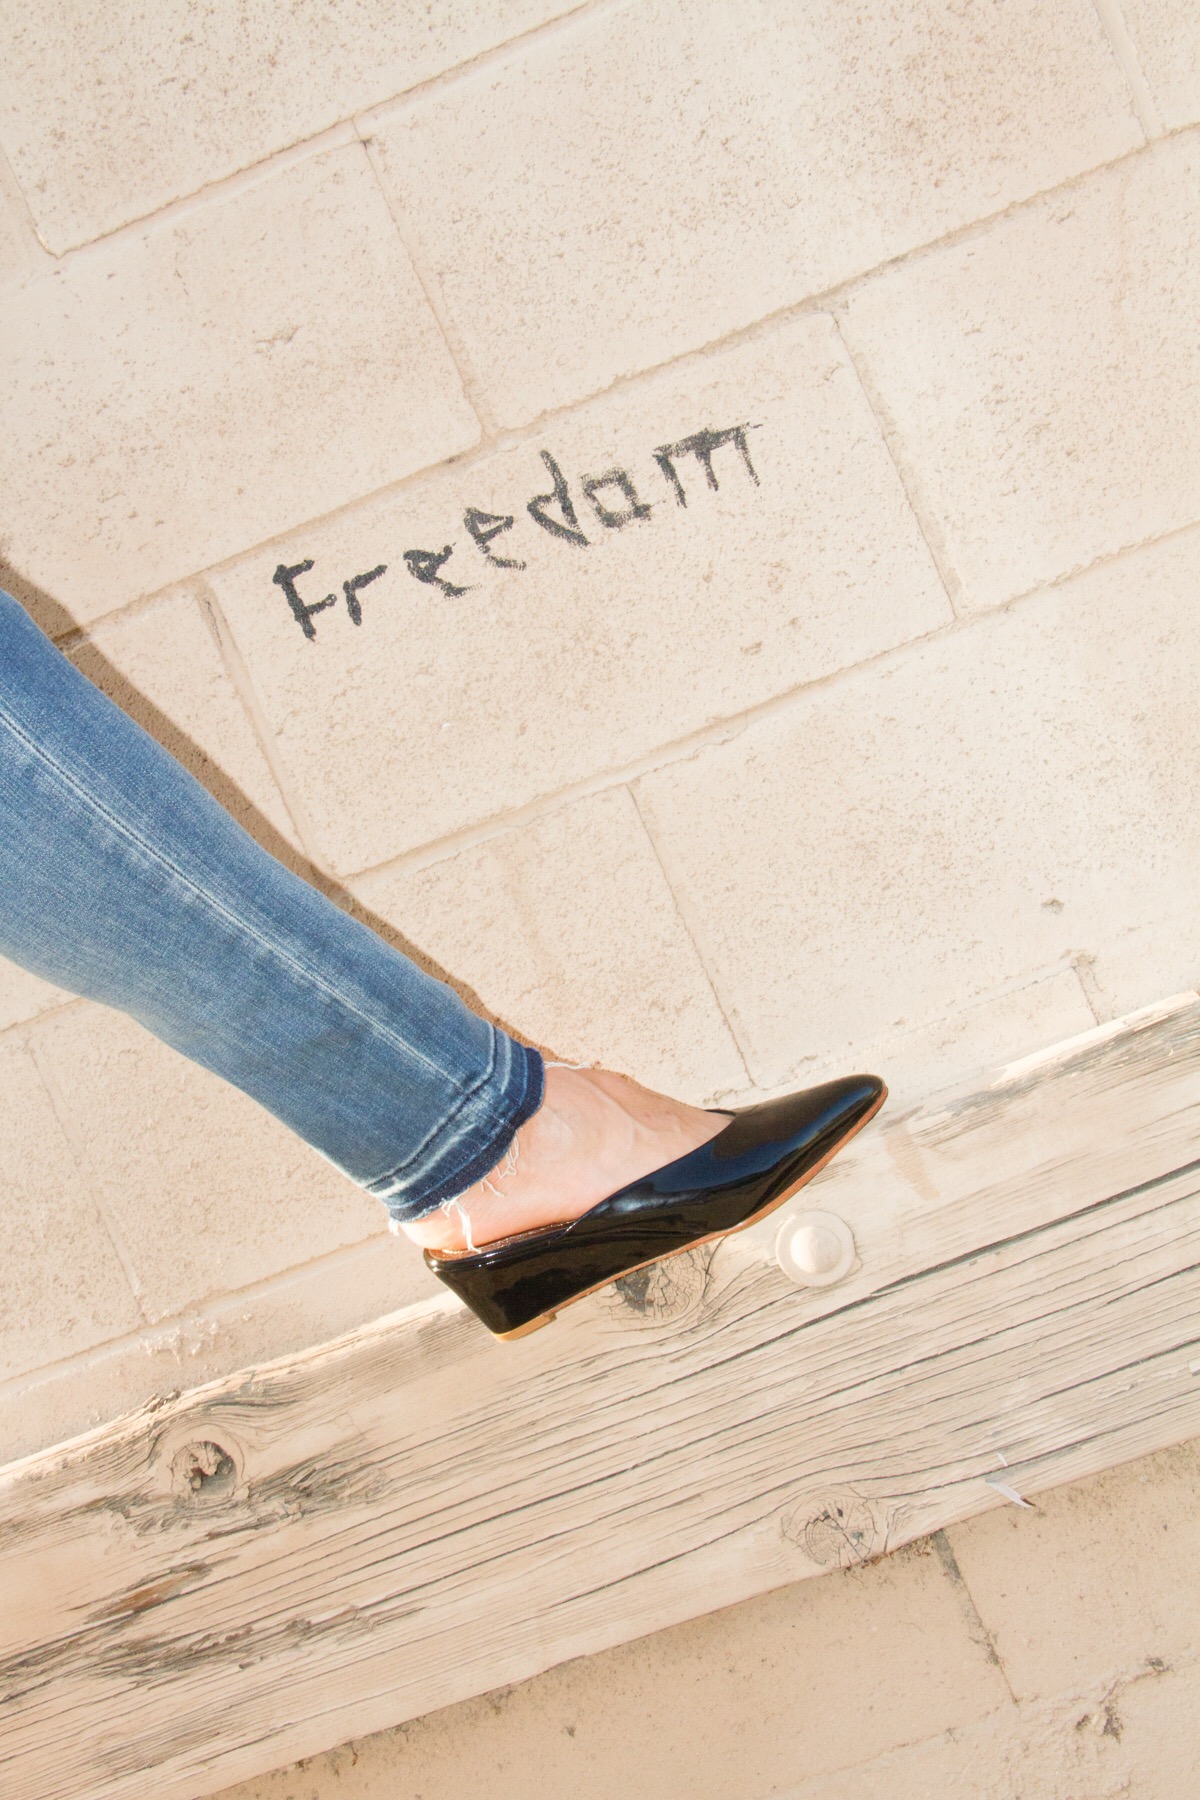 Investment Piece: Dressing like Freedom